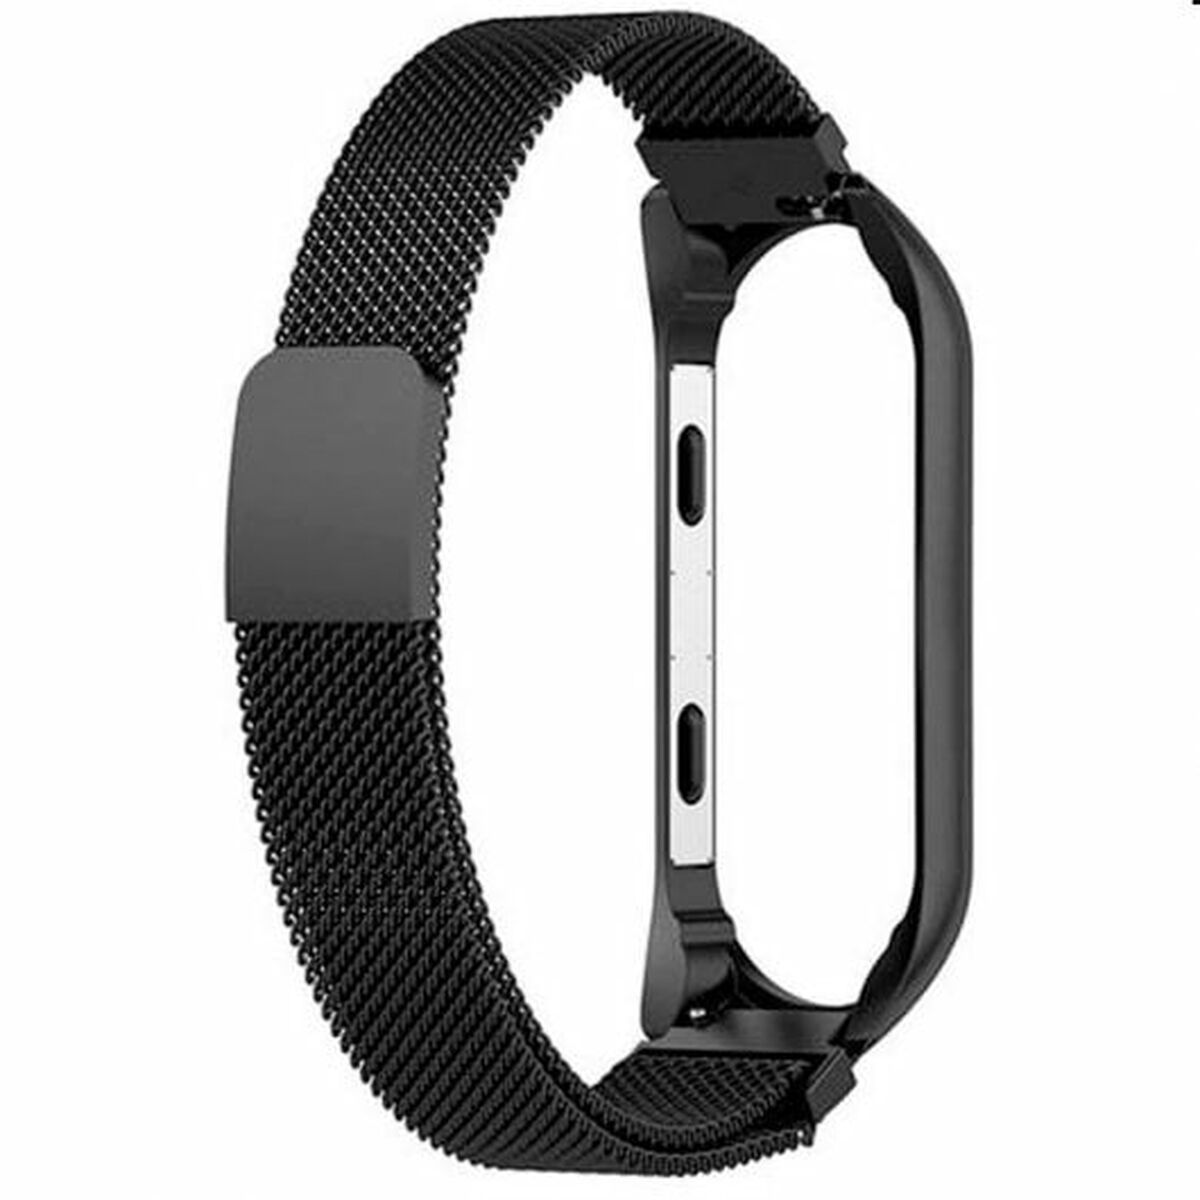 Watch Strap Cool Xiaomi Smart Band 8, Cool, Sports and outdoors, Electronics and devices, watch-strap-cool-xiaomi-smart-band-9, Brand_Cool, category-reference-2609, category-reference-2617, category-reference-2634, category-reference-t-19756, category-reference-t-7034, category-reference-t-7035, category-reference-t-7038, Condition_NEW, deportista / en forma, original gifts, Price_20 - 50, telephones & tablets, vida sana, RiotNook